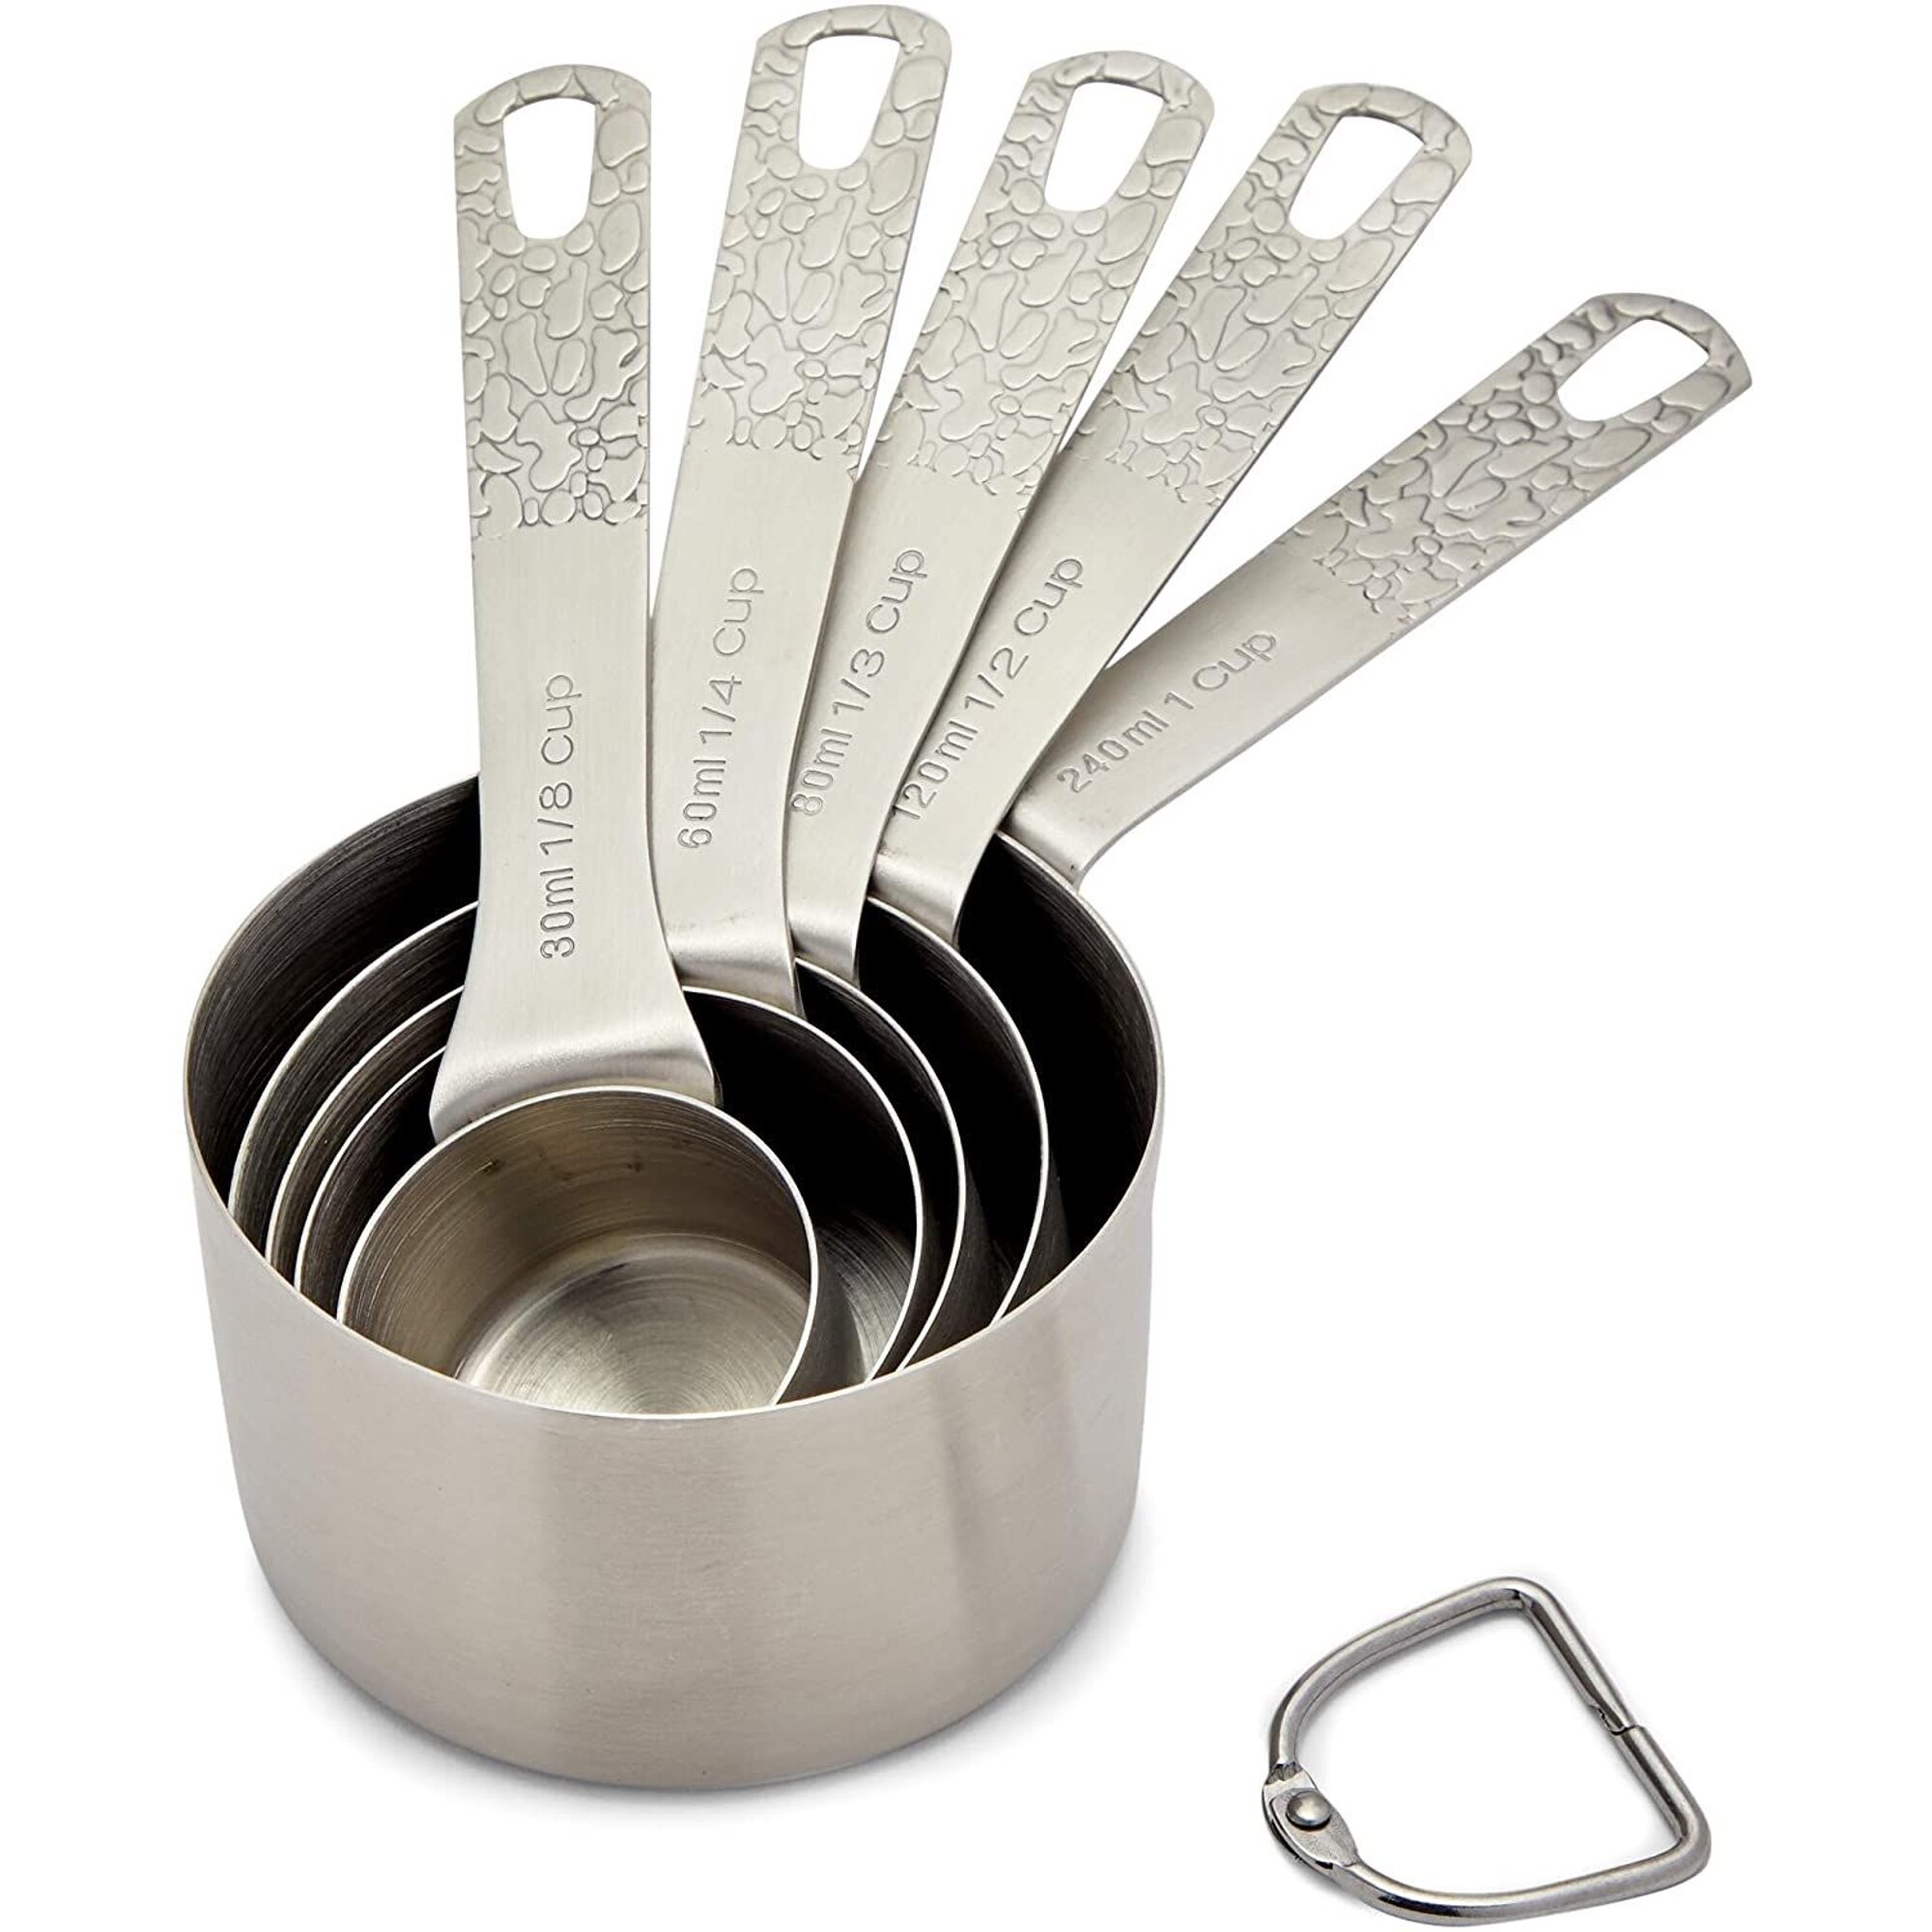 https://ak1.ostkcdn.com/images/products/is/images/direct/096d20bd2690fec15c1942e4cc3f7d8870dd8490/Stainless-Steel-Measuring-Cup-and-Spoon-Set%2C-US-and-Metric-Measurements-%2811-Sizes%29.jpg